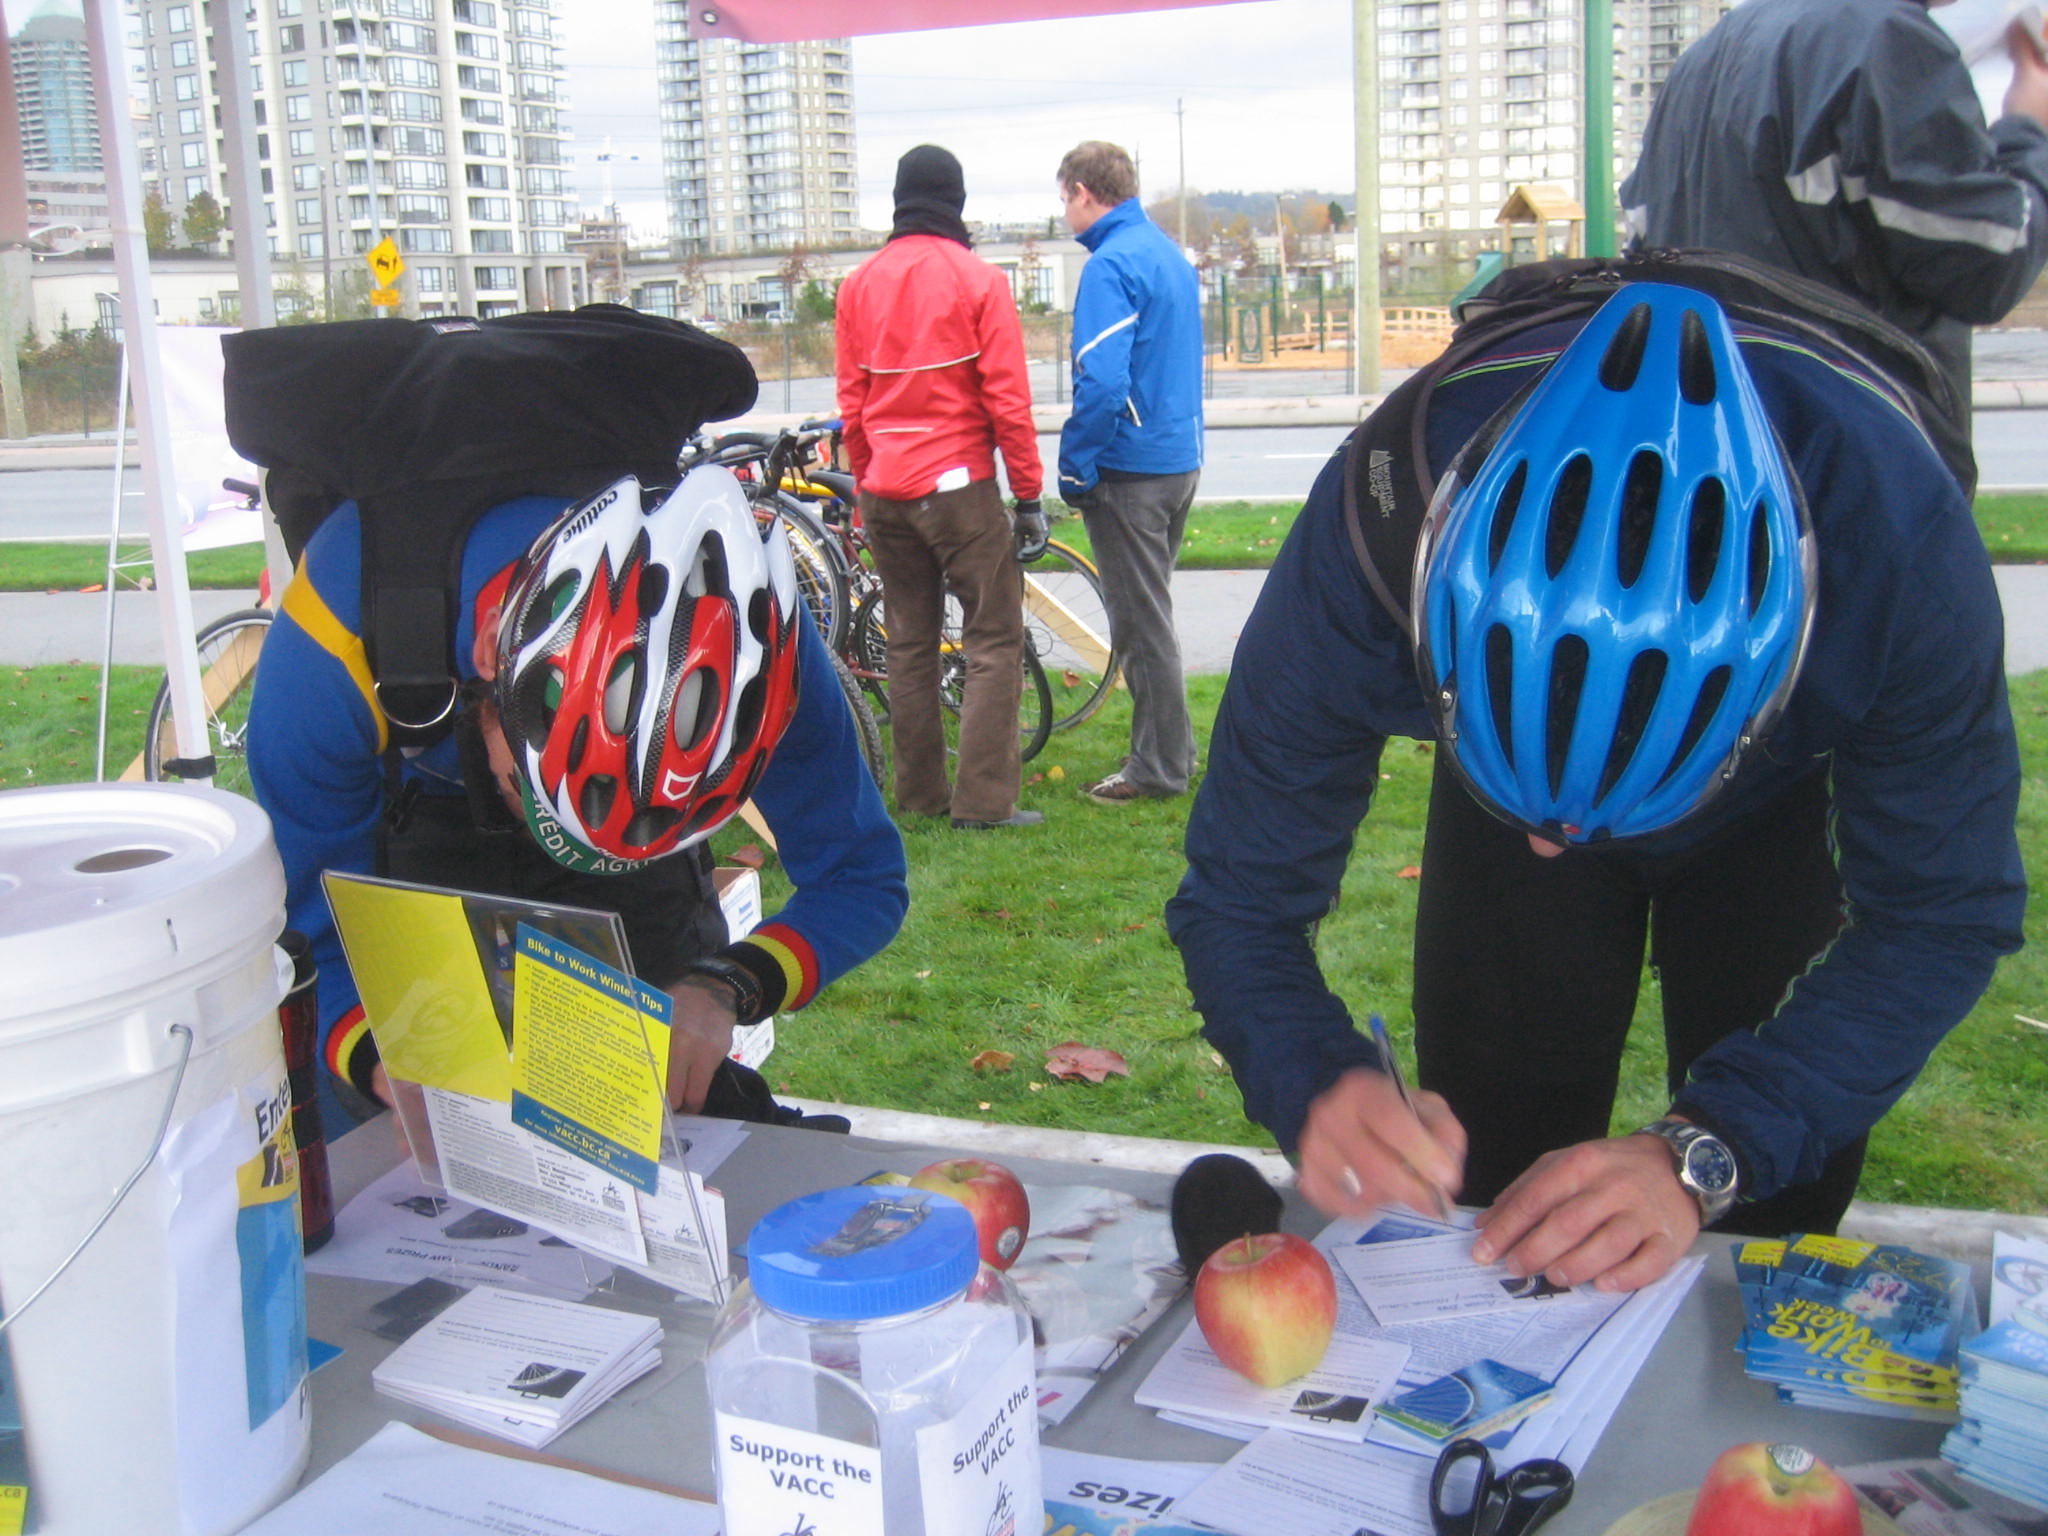 Riders fill out entry forms for the commuter station prize draw.